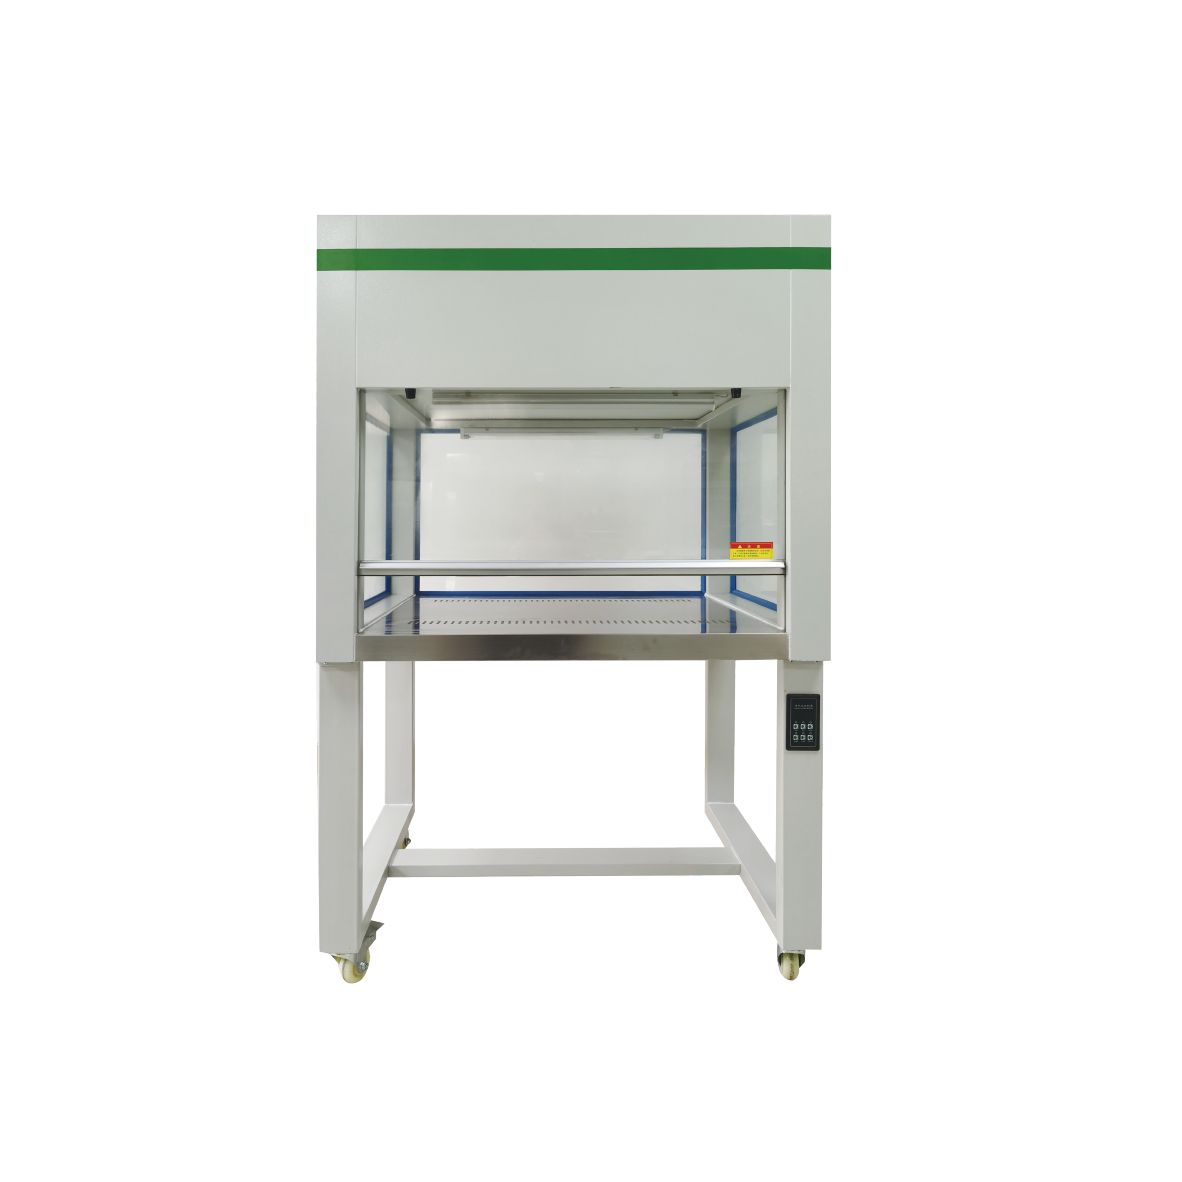 Vertical Flow Clean Bench For Cleanroom